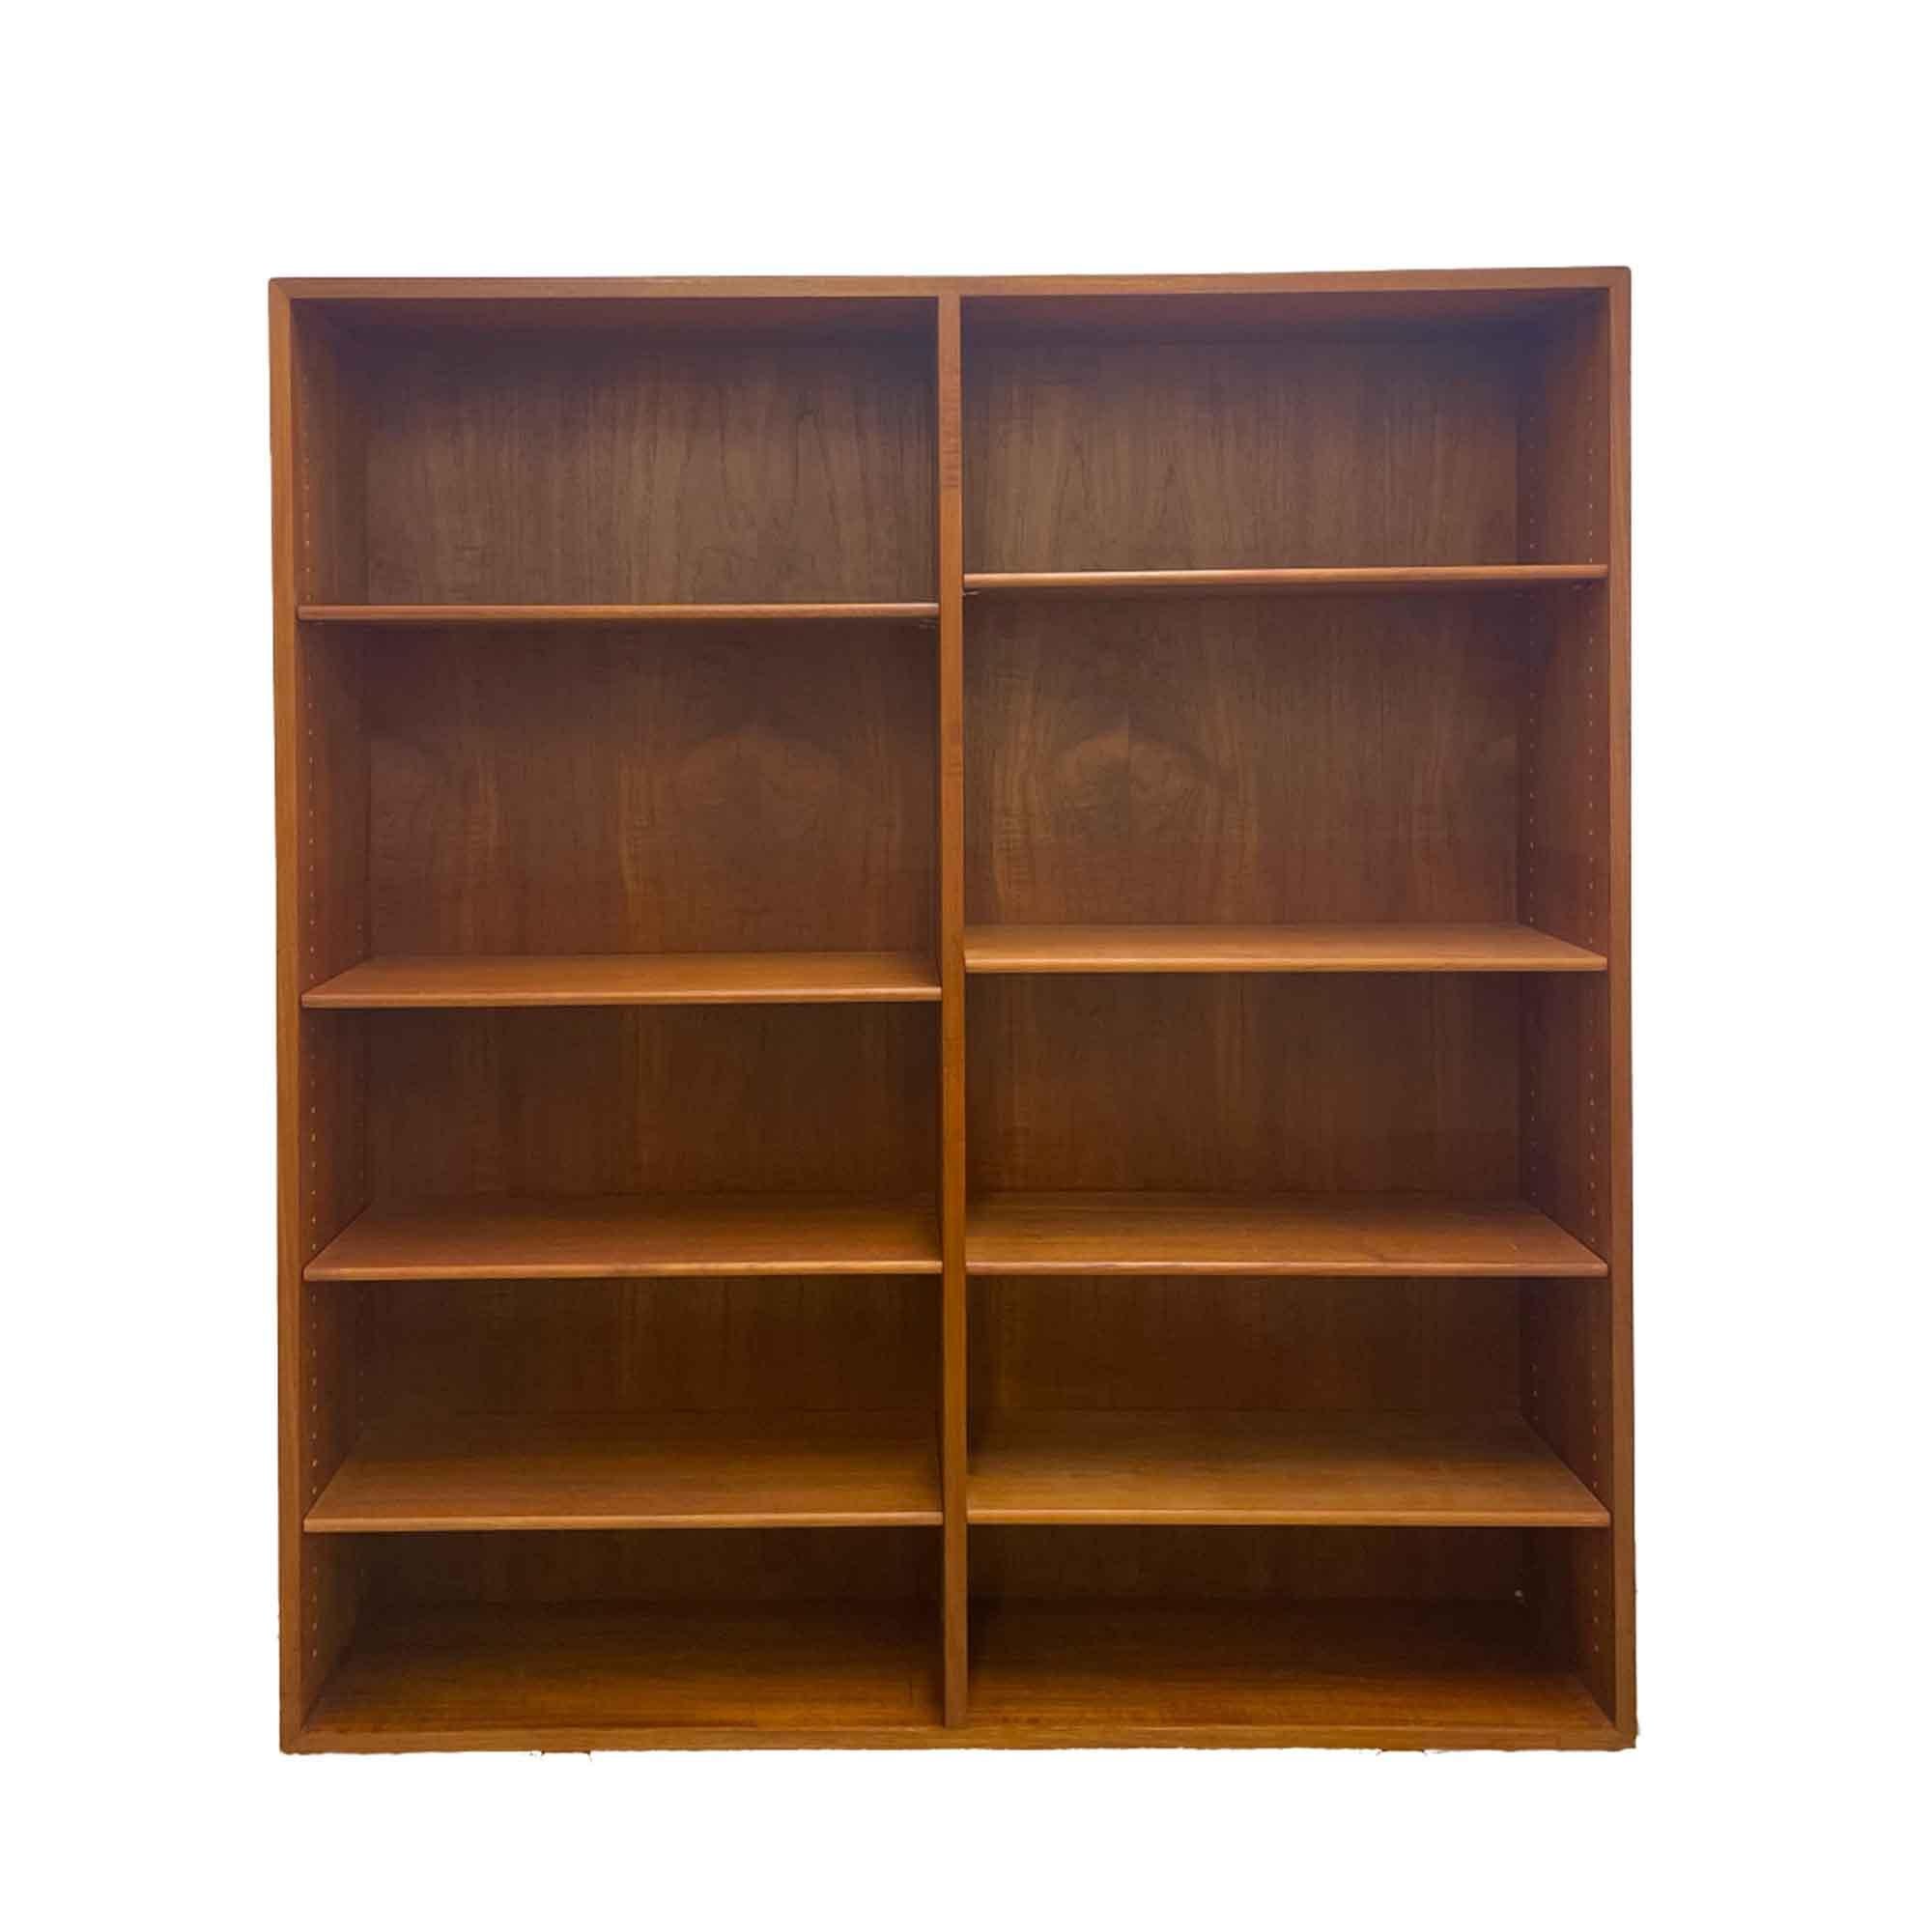 Very refined vintage teak shelving by Borge Mogensen.
2 modules: 1 low module and 1 high module superimposed. The space is filled with practical and adjustable shelves, it is a perfect solution for arranging a collection of books or objects.